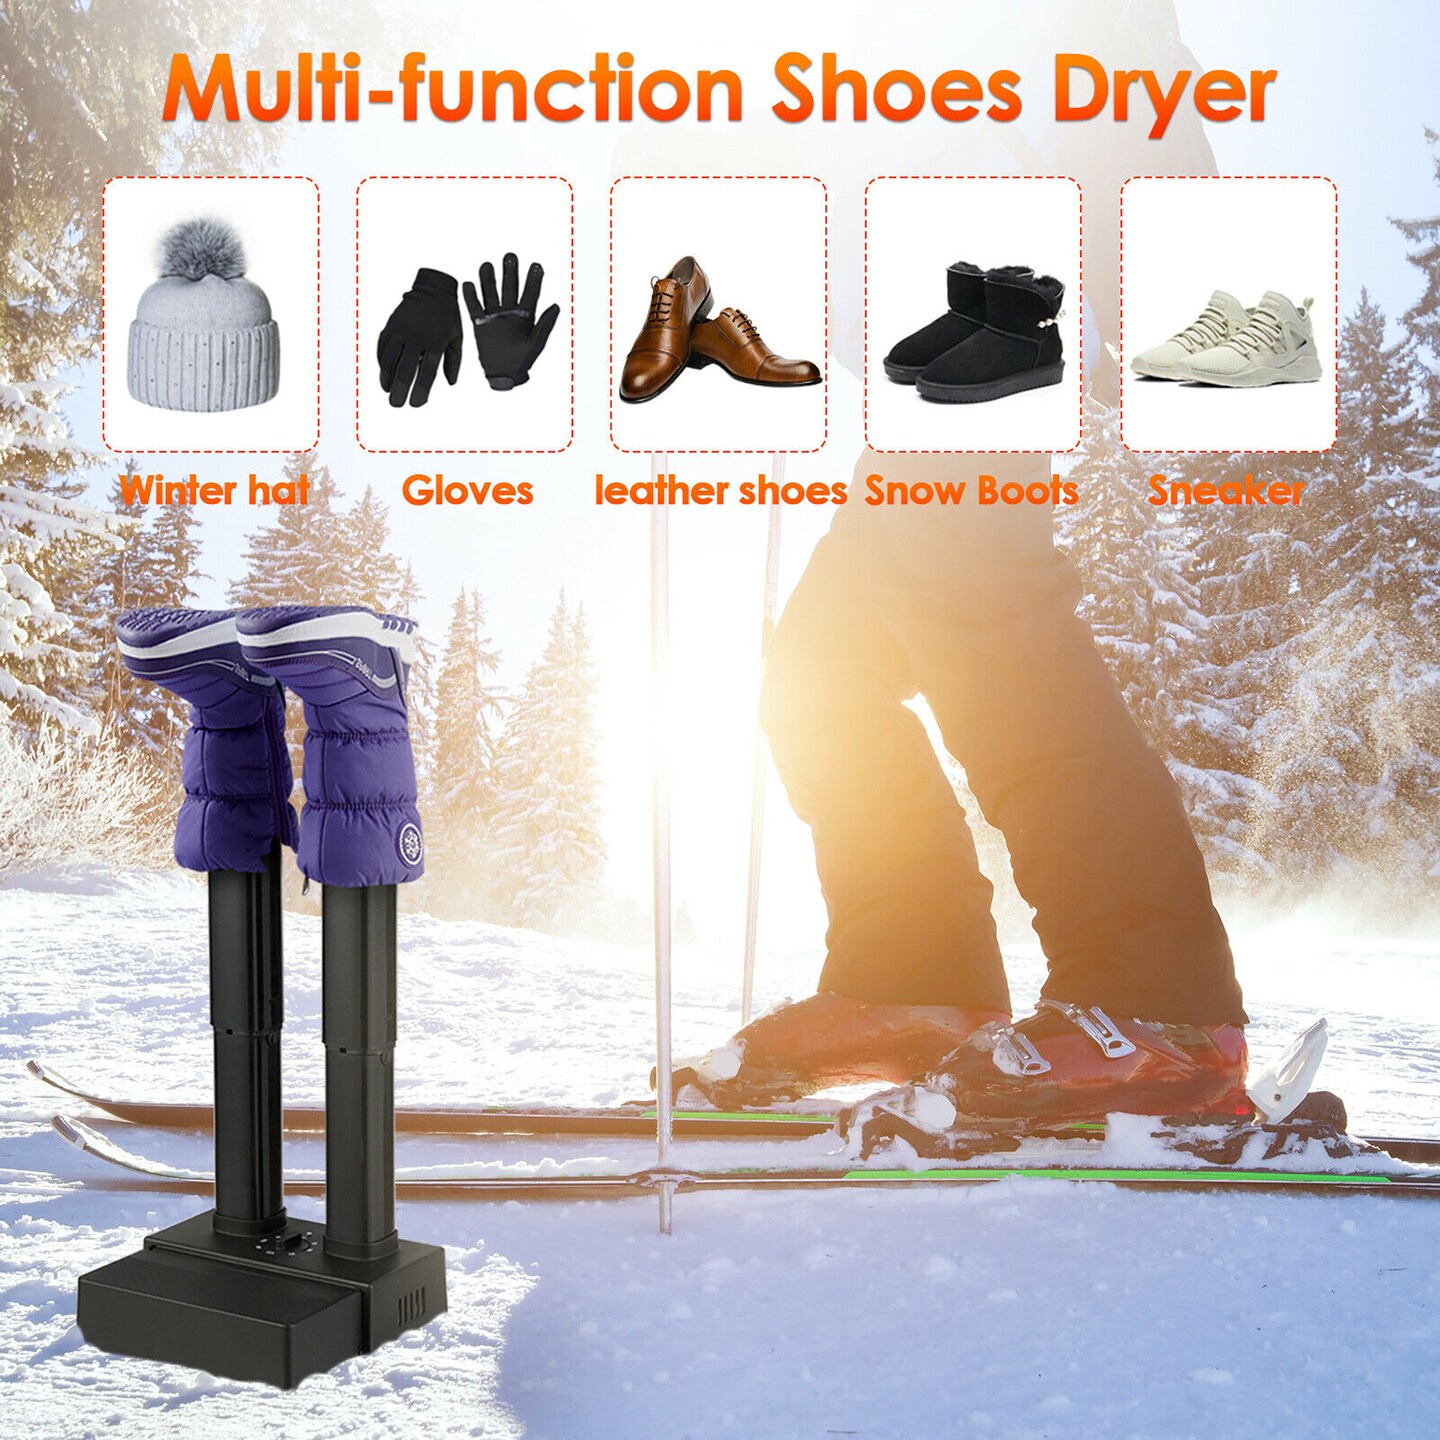 COSTWAY Boot Dryer, Electric Shoe Dryer and Warmer with Heat Blower, Fast  Drying, Overheat Protection, Easy to Assemble, Shoe Dryer for Work Boots,  Shoes, Gloves and Socks (2-Shoe)